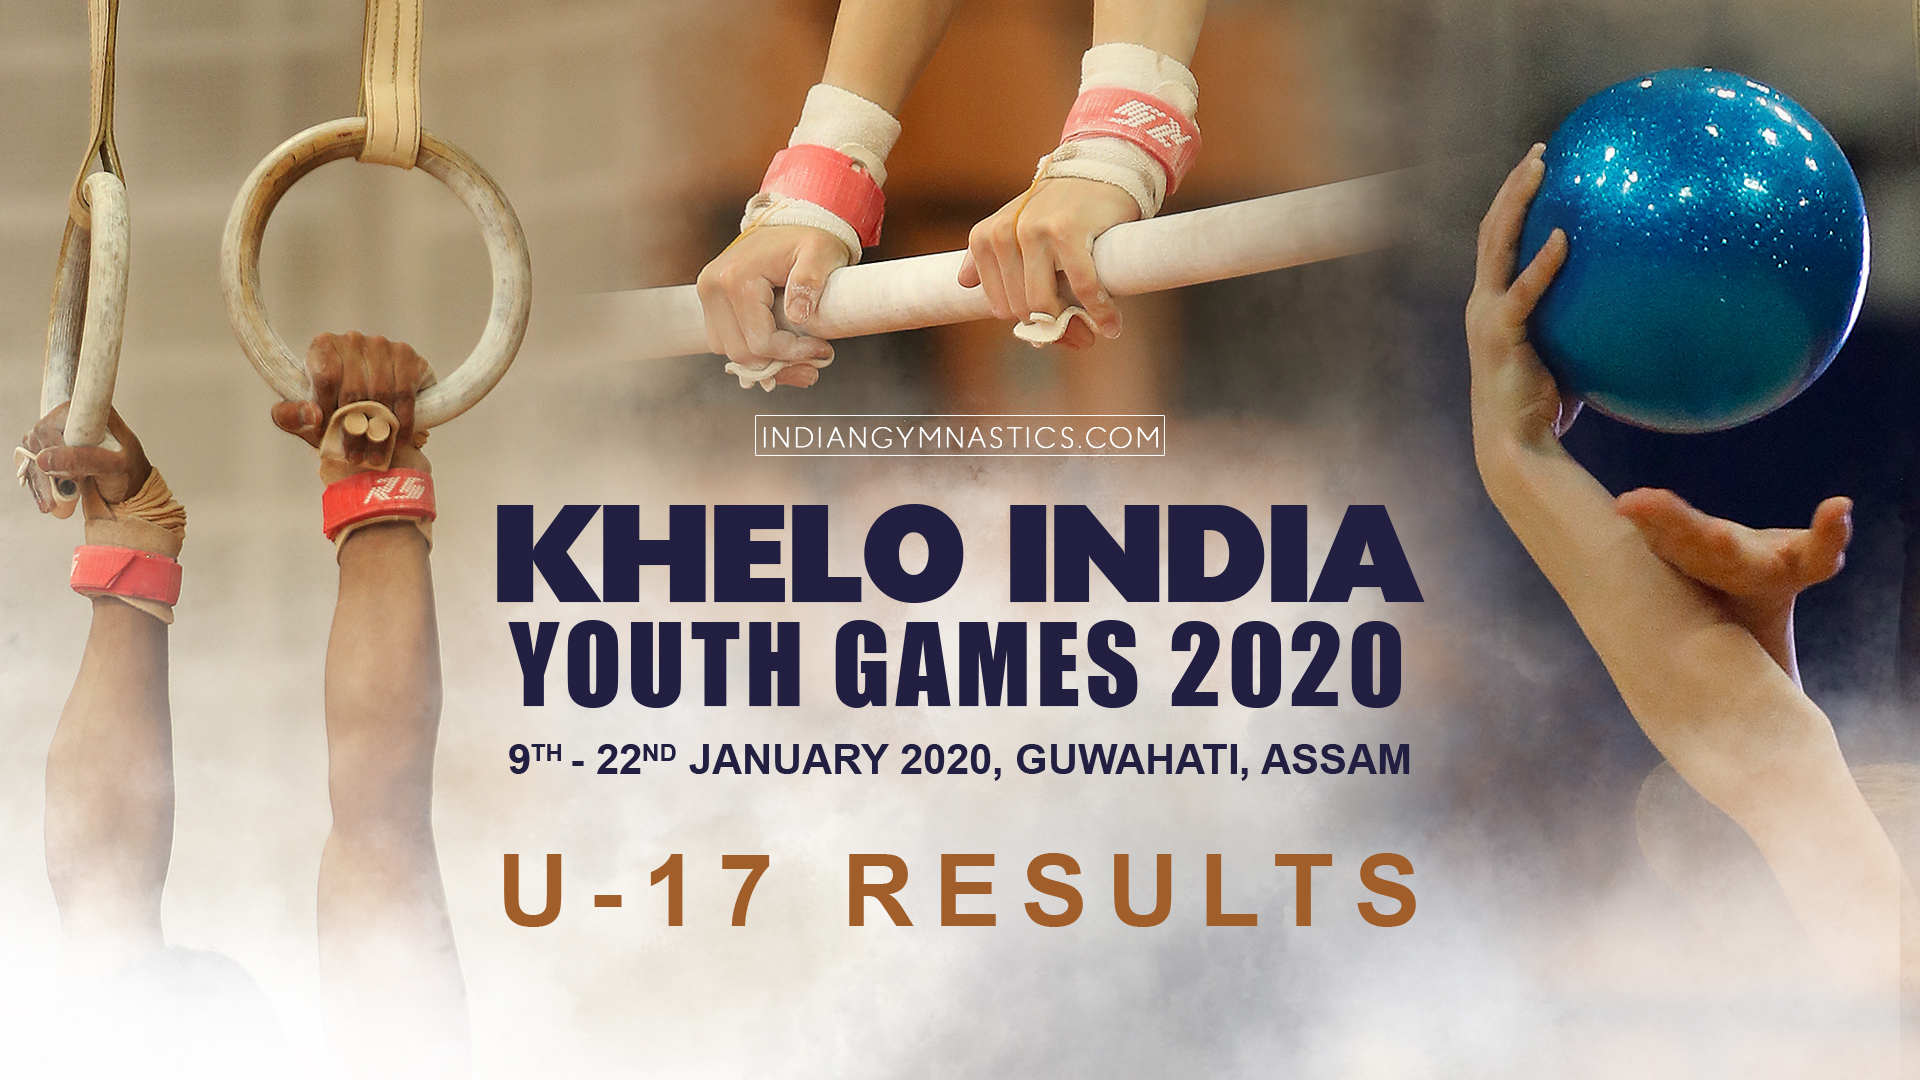 Khelo India Youth Games 2020 | Under 17 Results